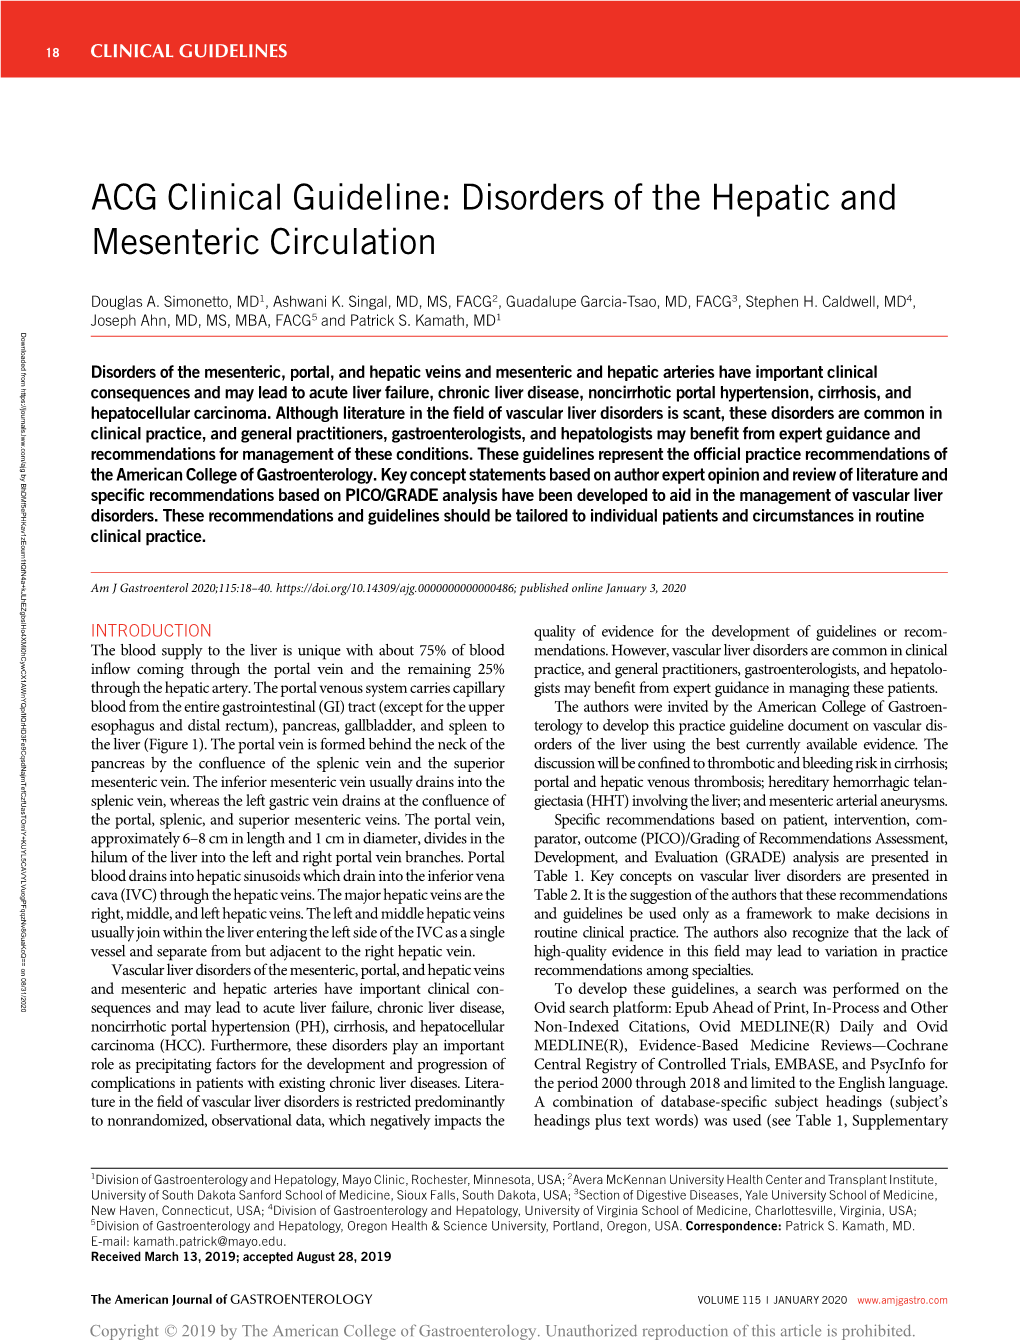 ACG Clinical Guideline: Disorders of the Hepatic and Mesenteric Circulation